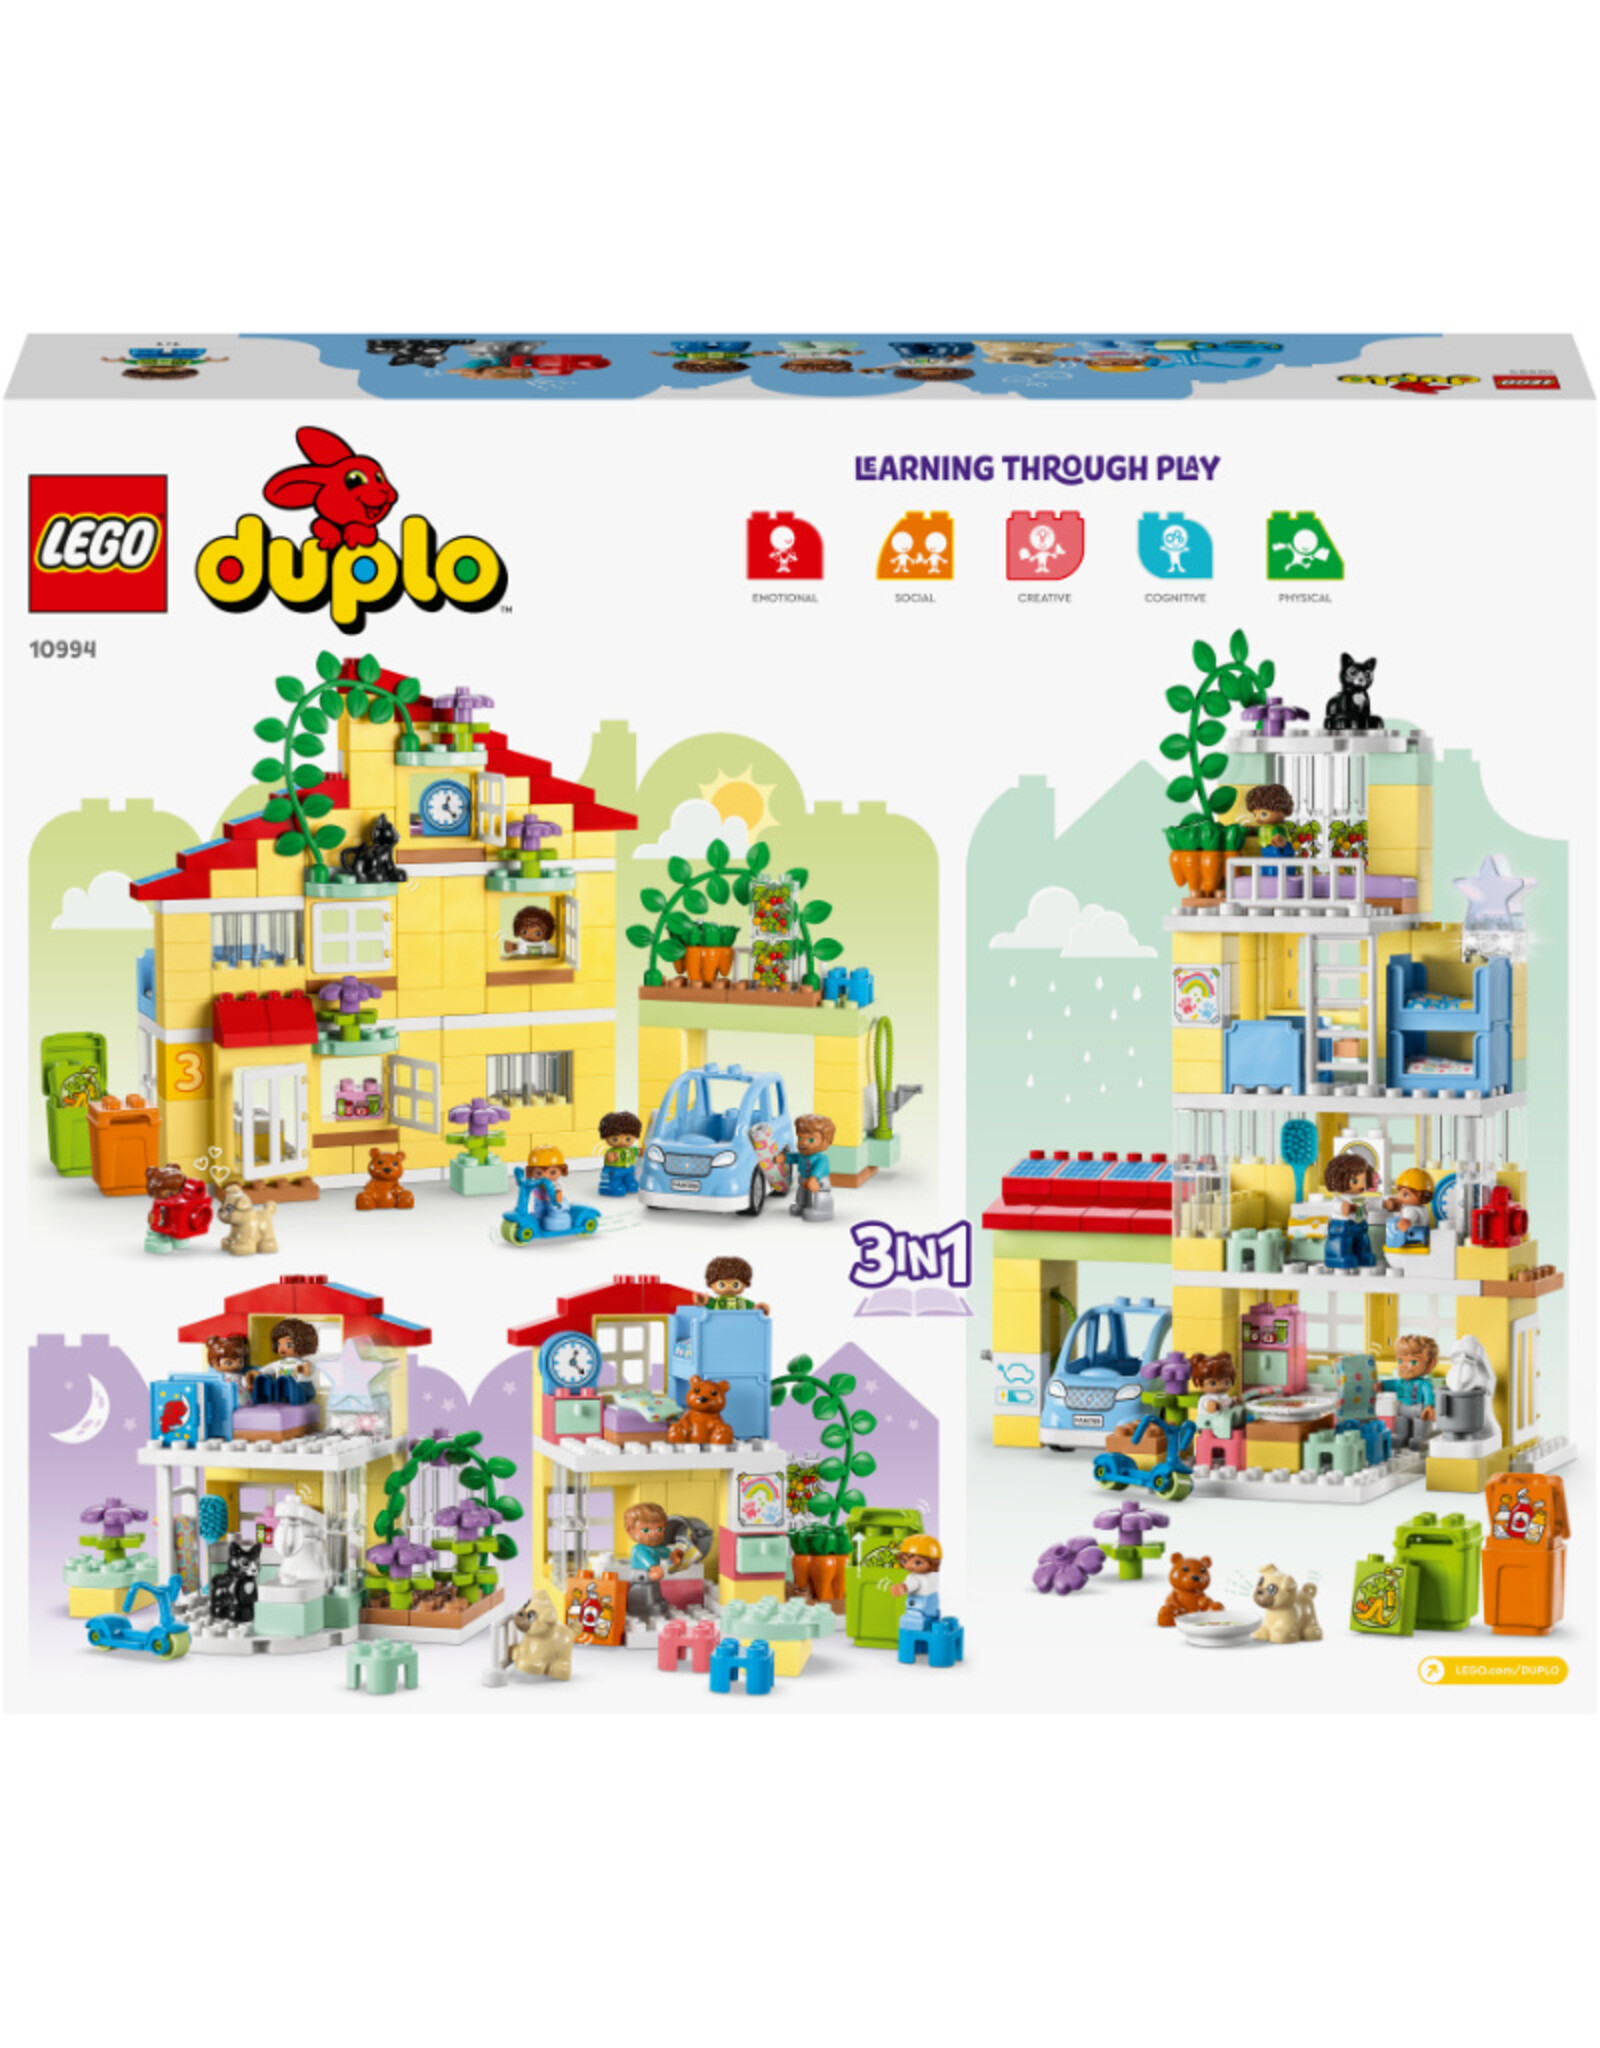 LEGO Duplo 10994 3in1 Family House